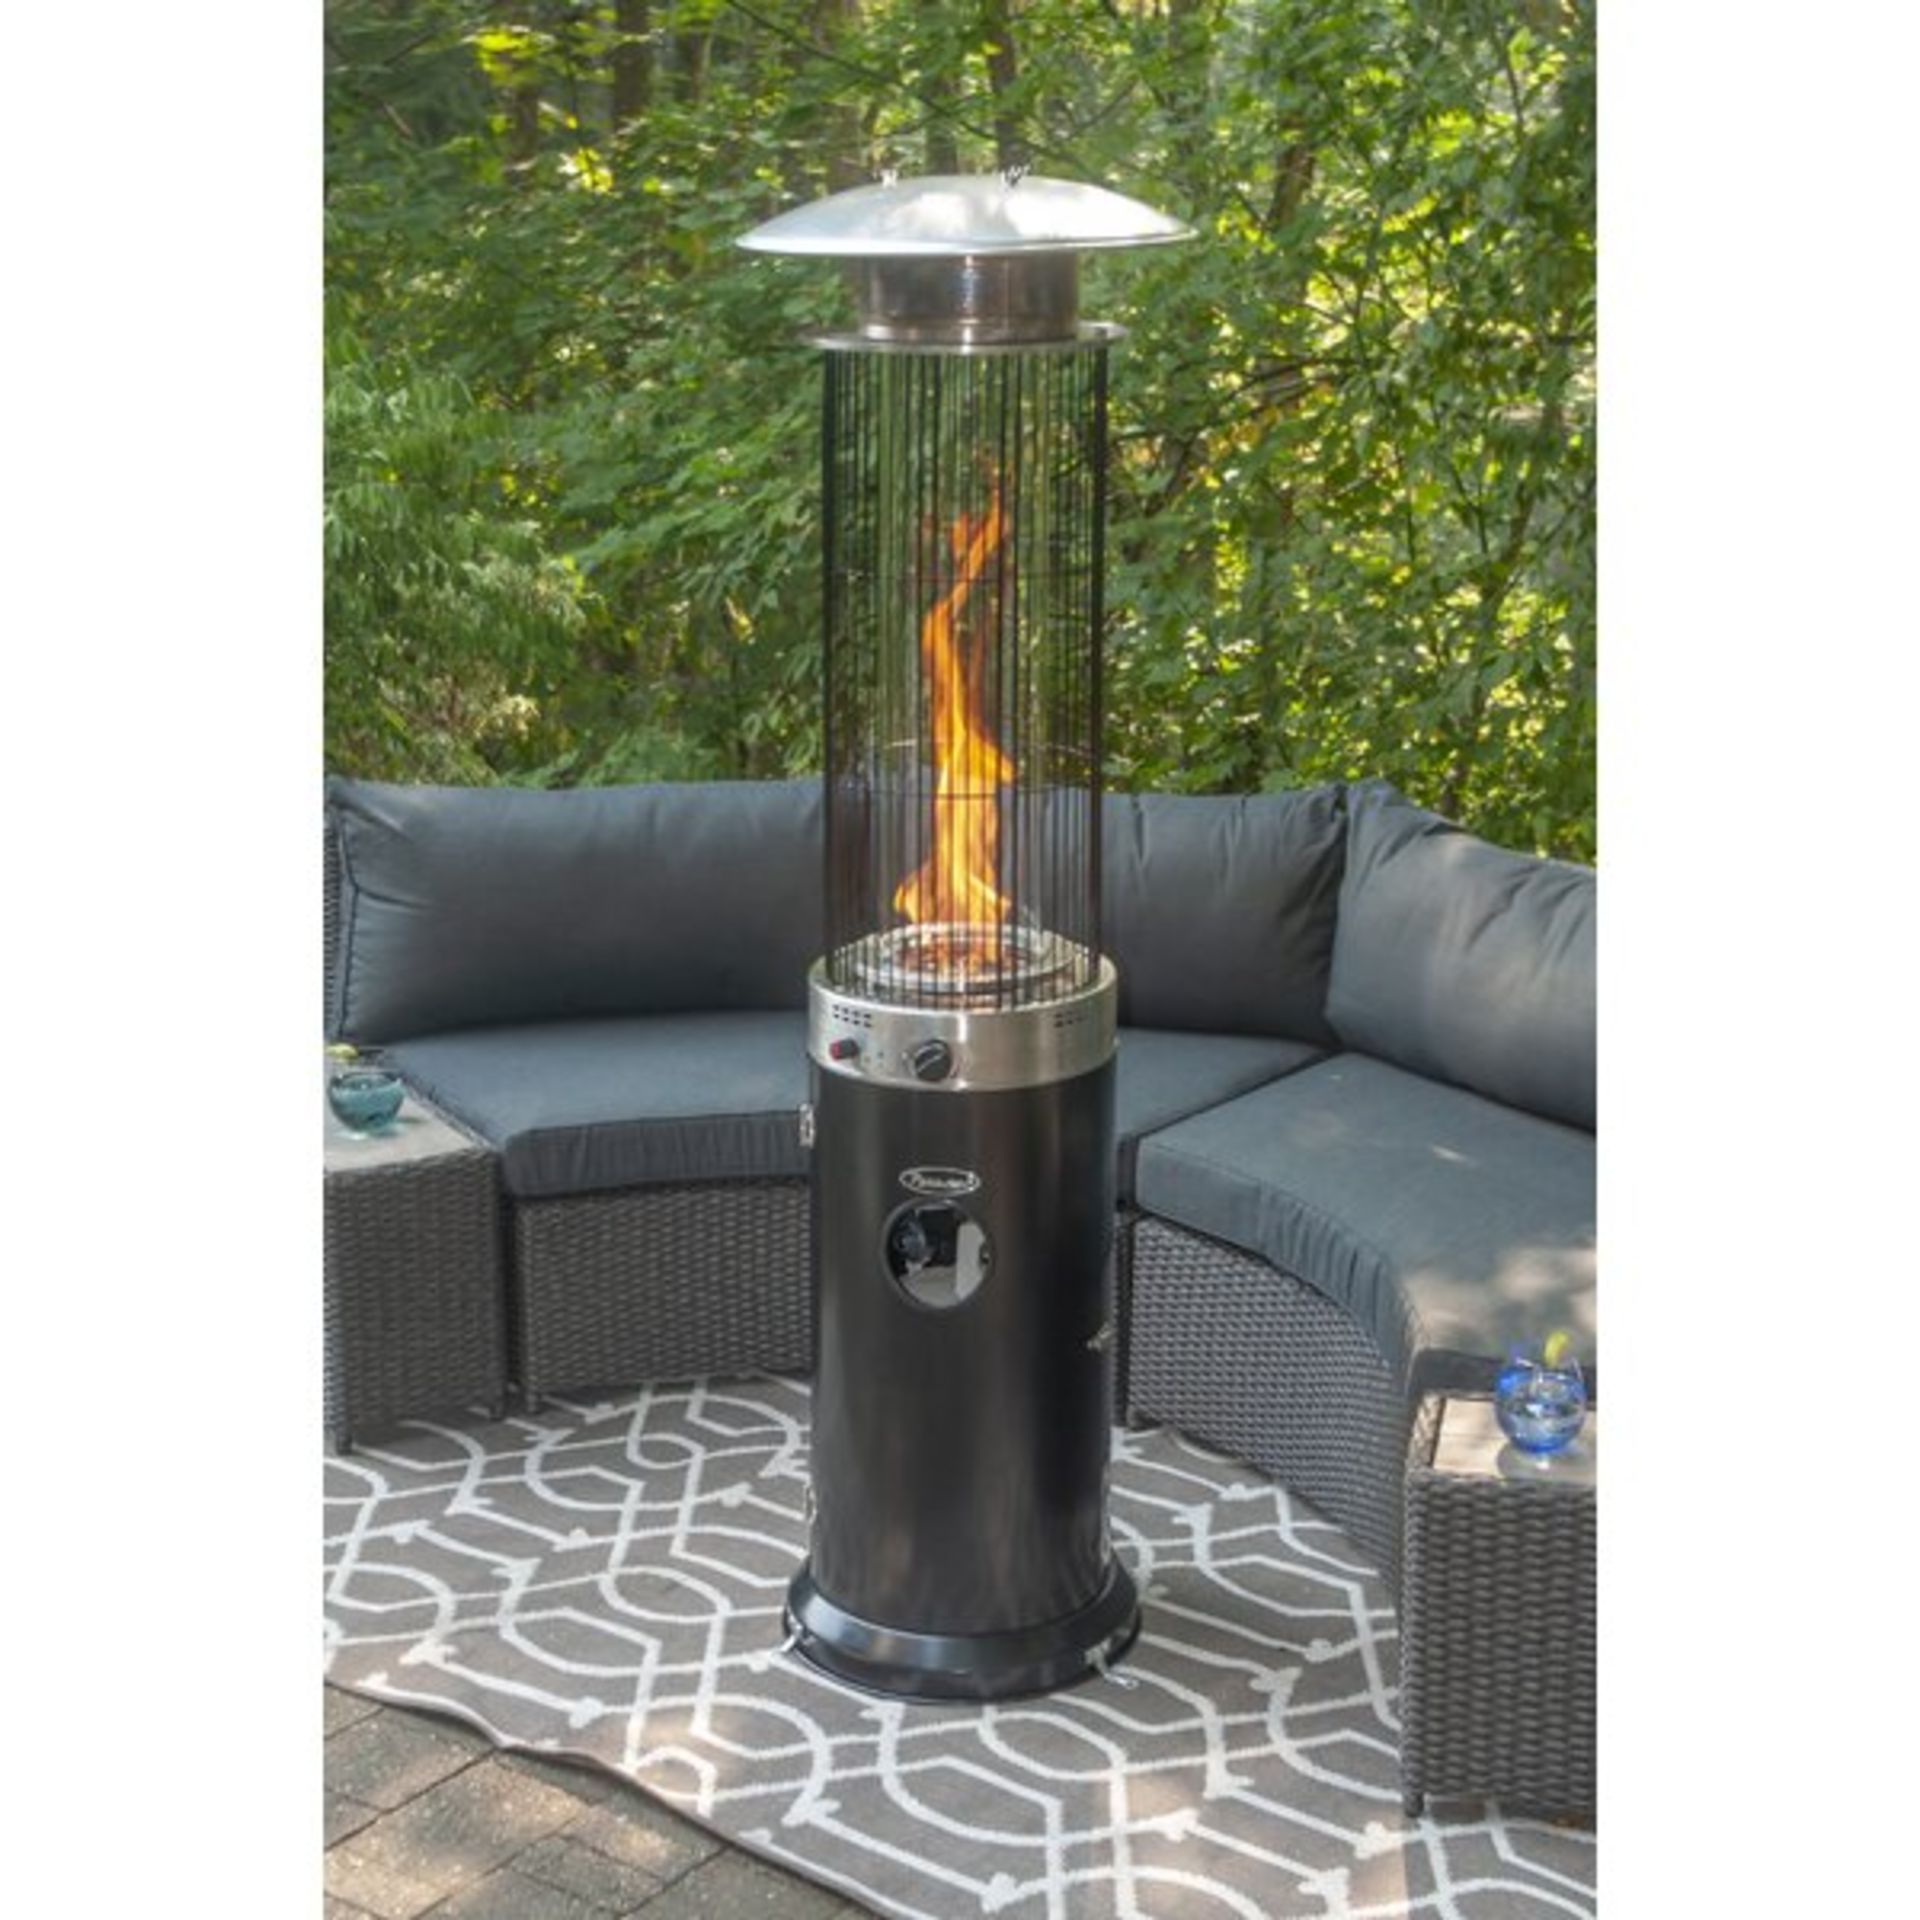 + VAT Brand New Chelsea Garden Company Wheeled Garden Gas Patio Heater With Cover - Item Is - Image 2 of 2